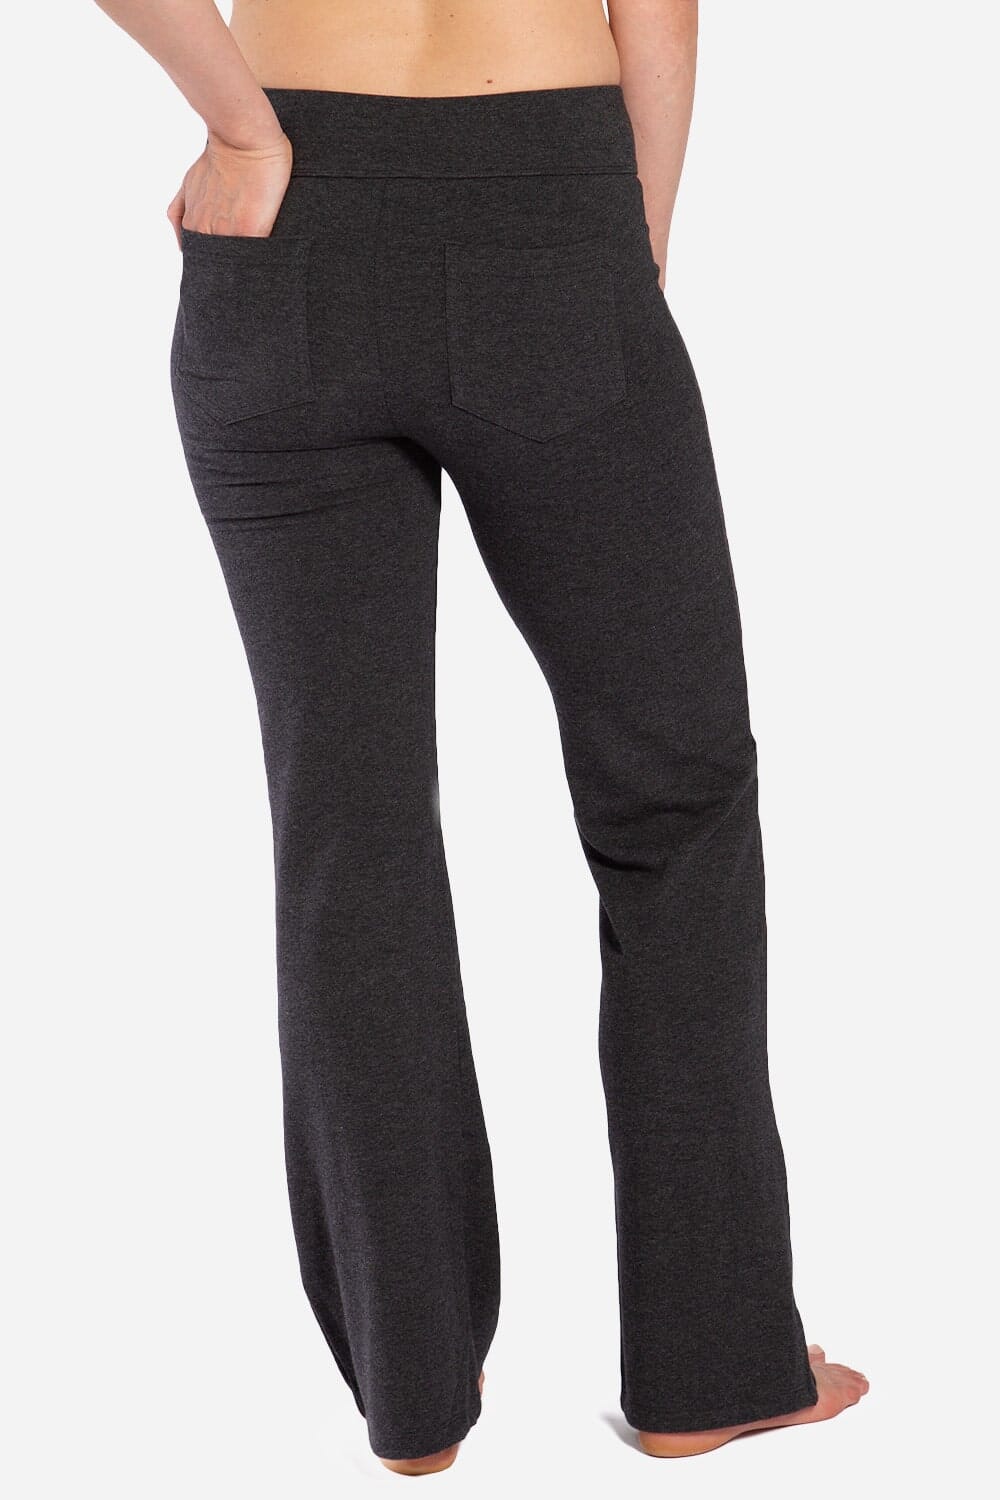 Bootleg Yoga Pants with Pockets, Women's Athleisure